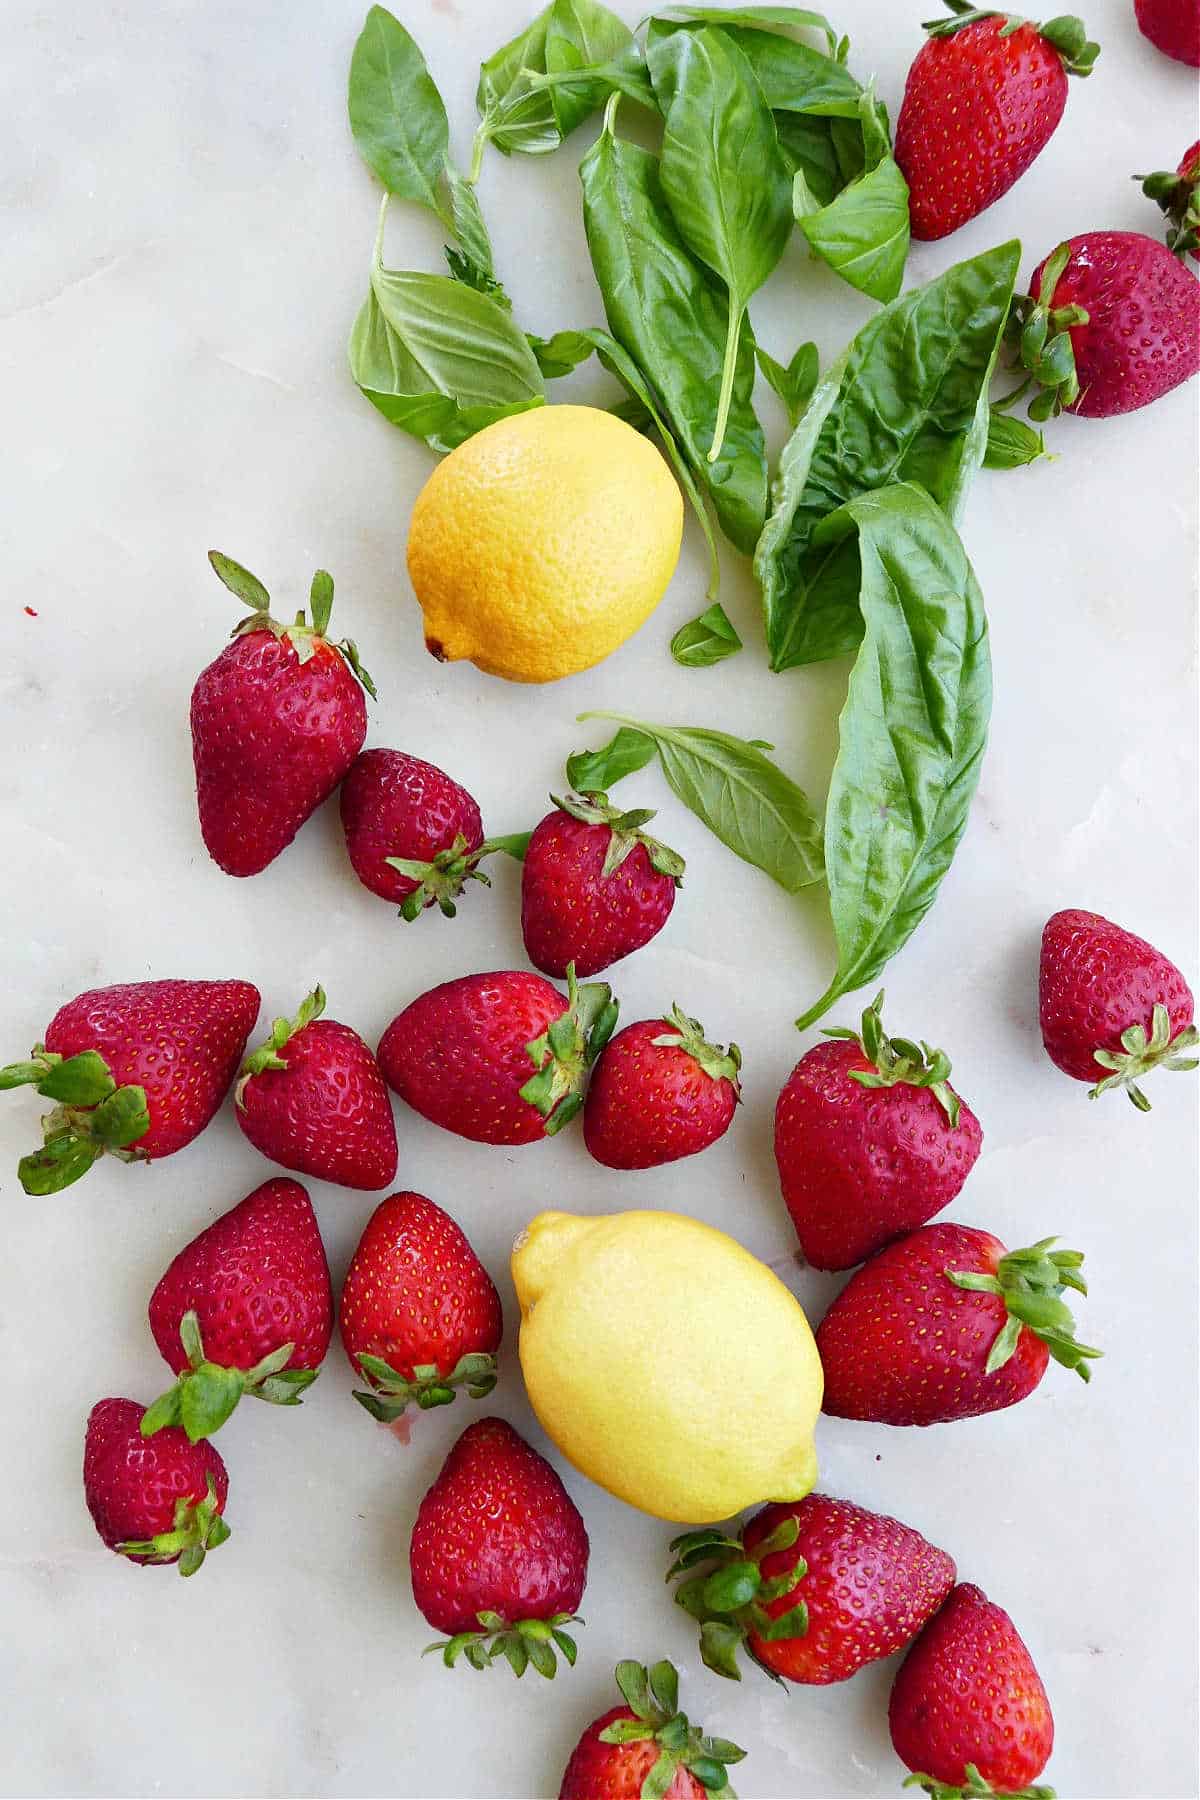 basil leaves, strawberries, and lemons spread out on a marble counter